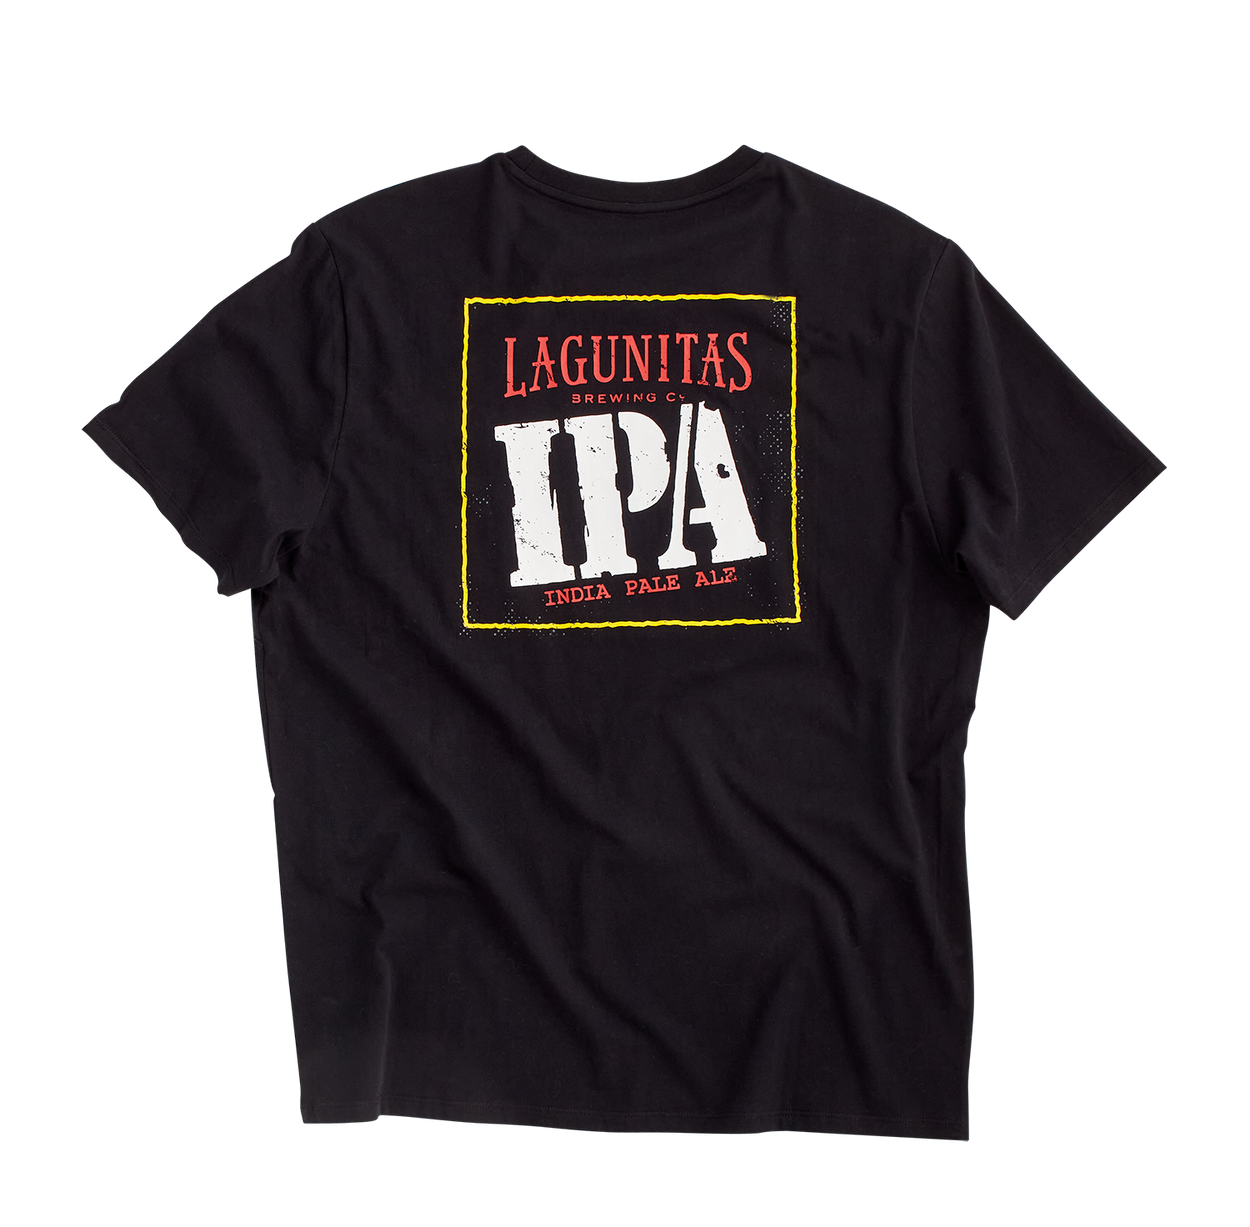 “Craft beer-inspired, stylish t-shirt with a unique pocket design. Perfect for craft beer enthusiasts and lovers of Lagunitas IPA”